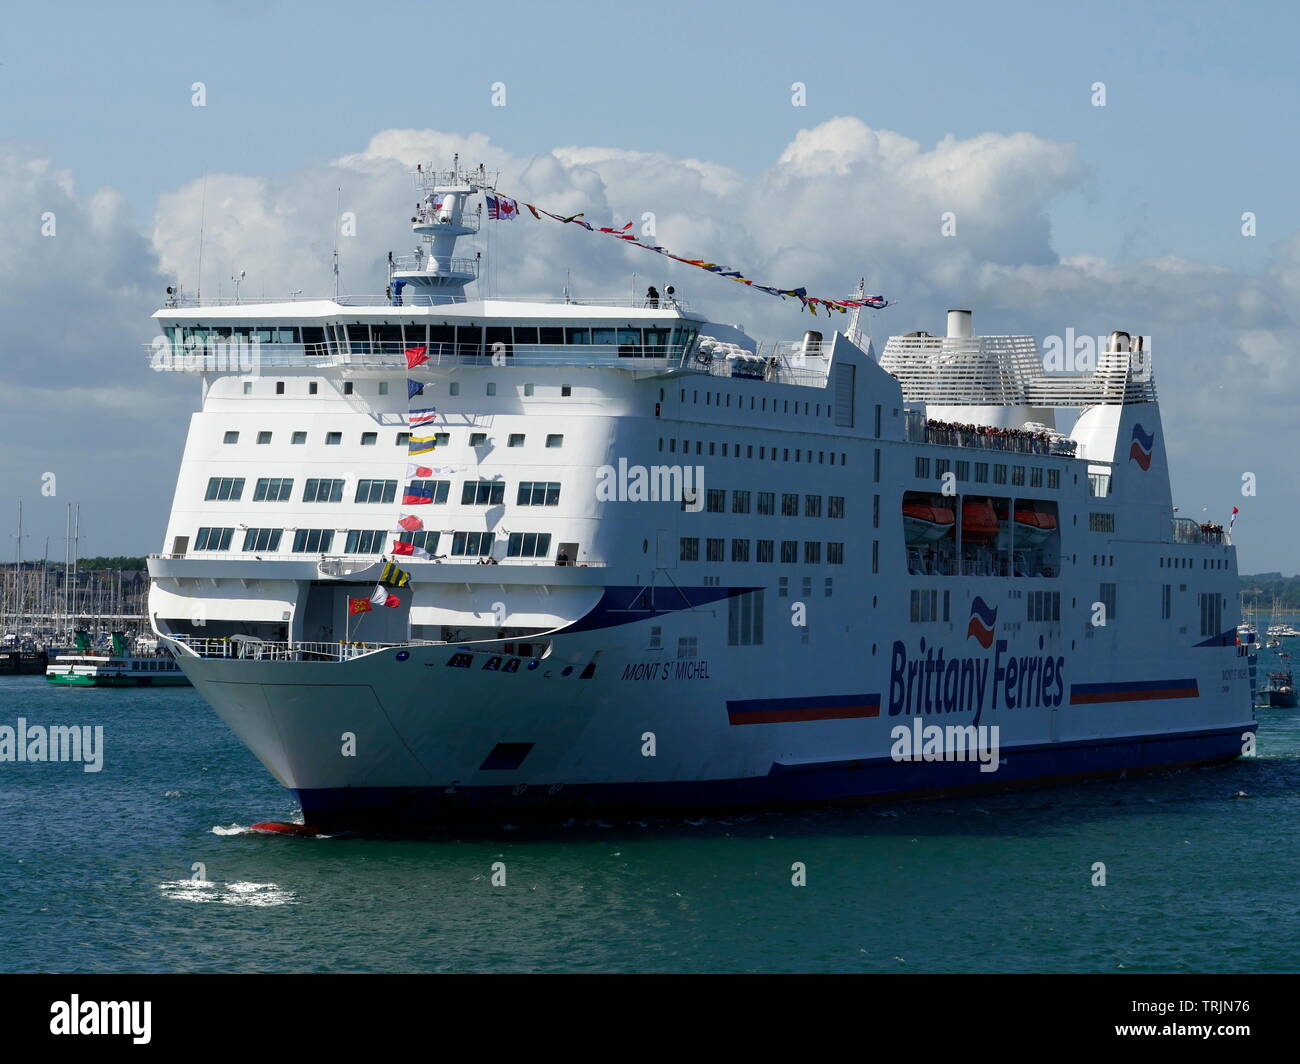 AJAXNETPHOTO. 3RD JUNE, 2019. PORTSMOUTH, ENGLAND. - BRITTANY FERRIES CROSS CHANNEL FERRY MONT ST.MICHEL, HER DECKS LINED WITH 1944 D-DAY VETERANS AND DRESSED OVERALL WITH BUNTING, OUTWARD BOUND TO NORMANDY AHEAD OF THE VETERAN EX COASTAL FORCES LITTLE SHIP FLOTILLA.PHOTO:JONATHAN EASTLAND/AJAX REF:GX8 190306 338 Stock Photo